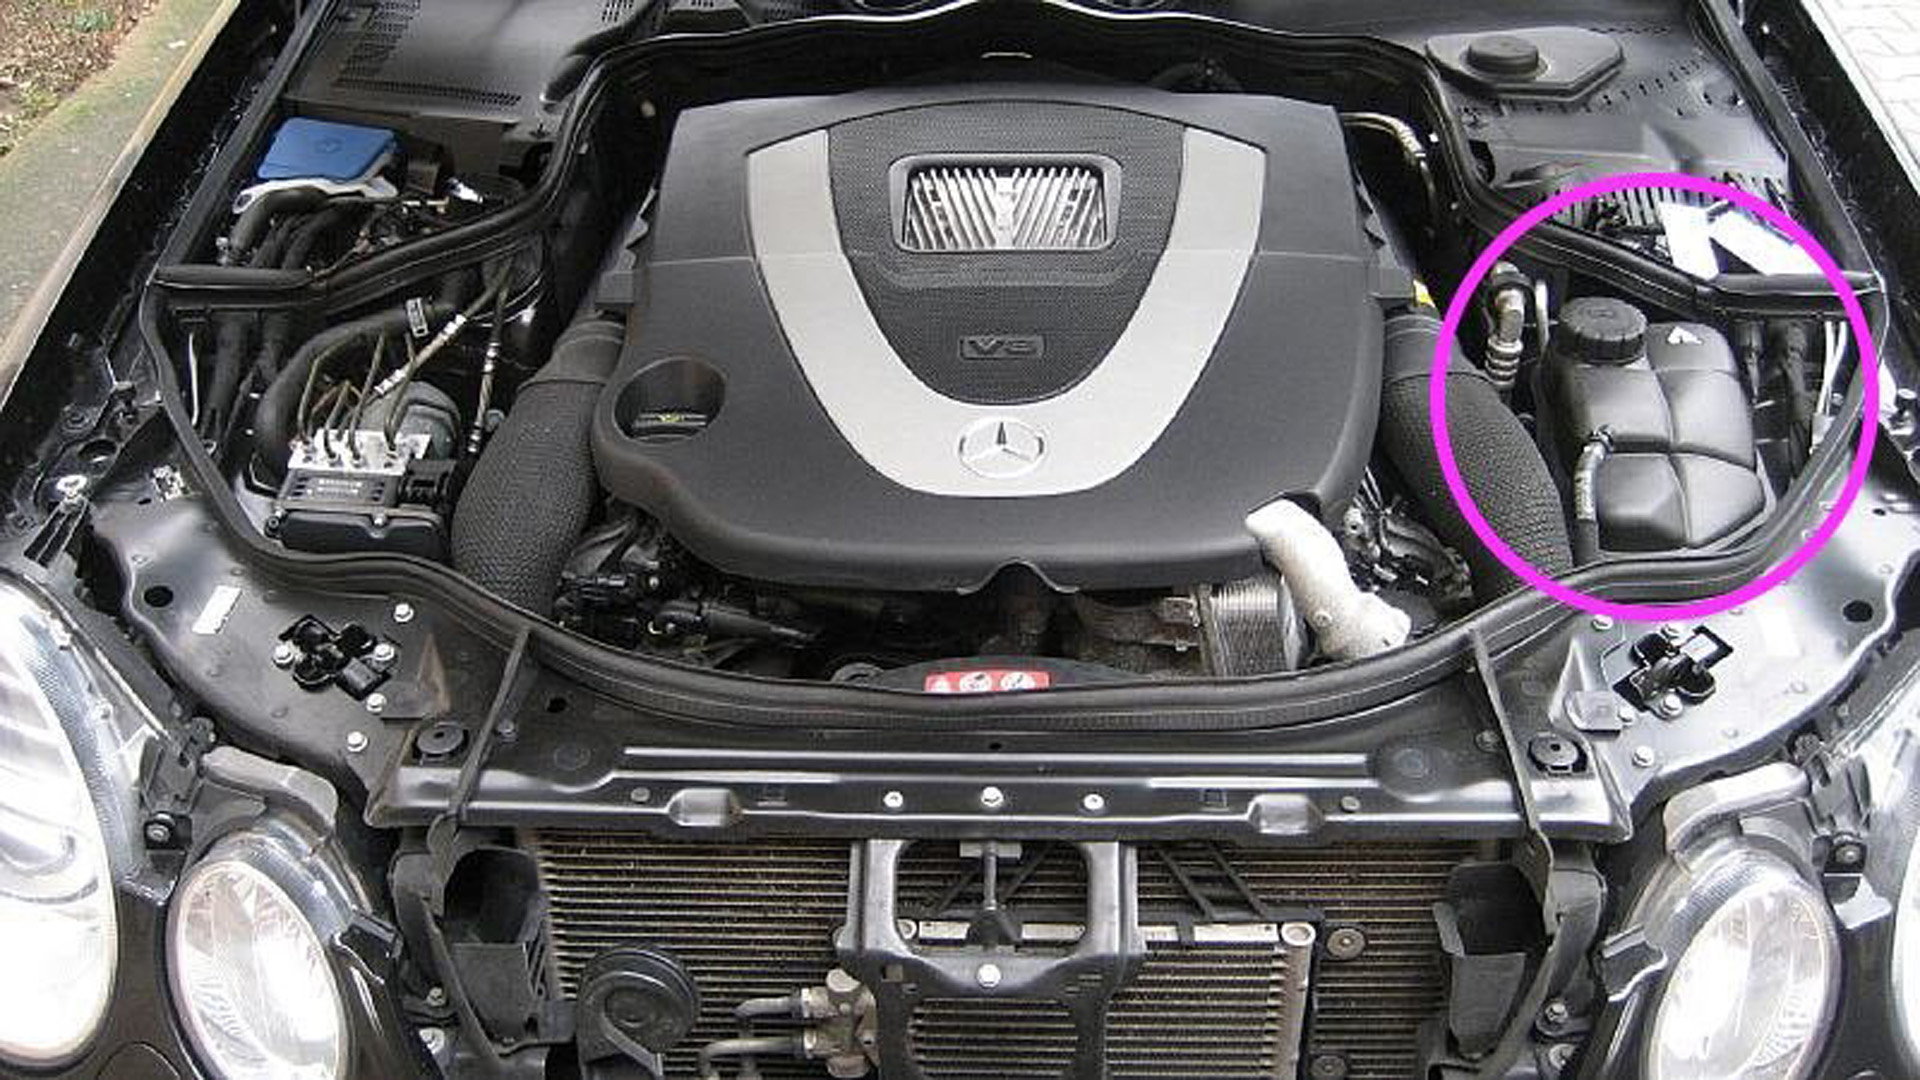 Mercedes-Benz E-Class and E-Class AMG: How to Stop Radiator Leak | Mbworld